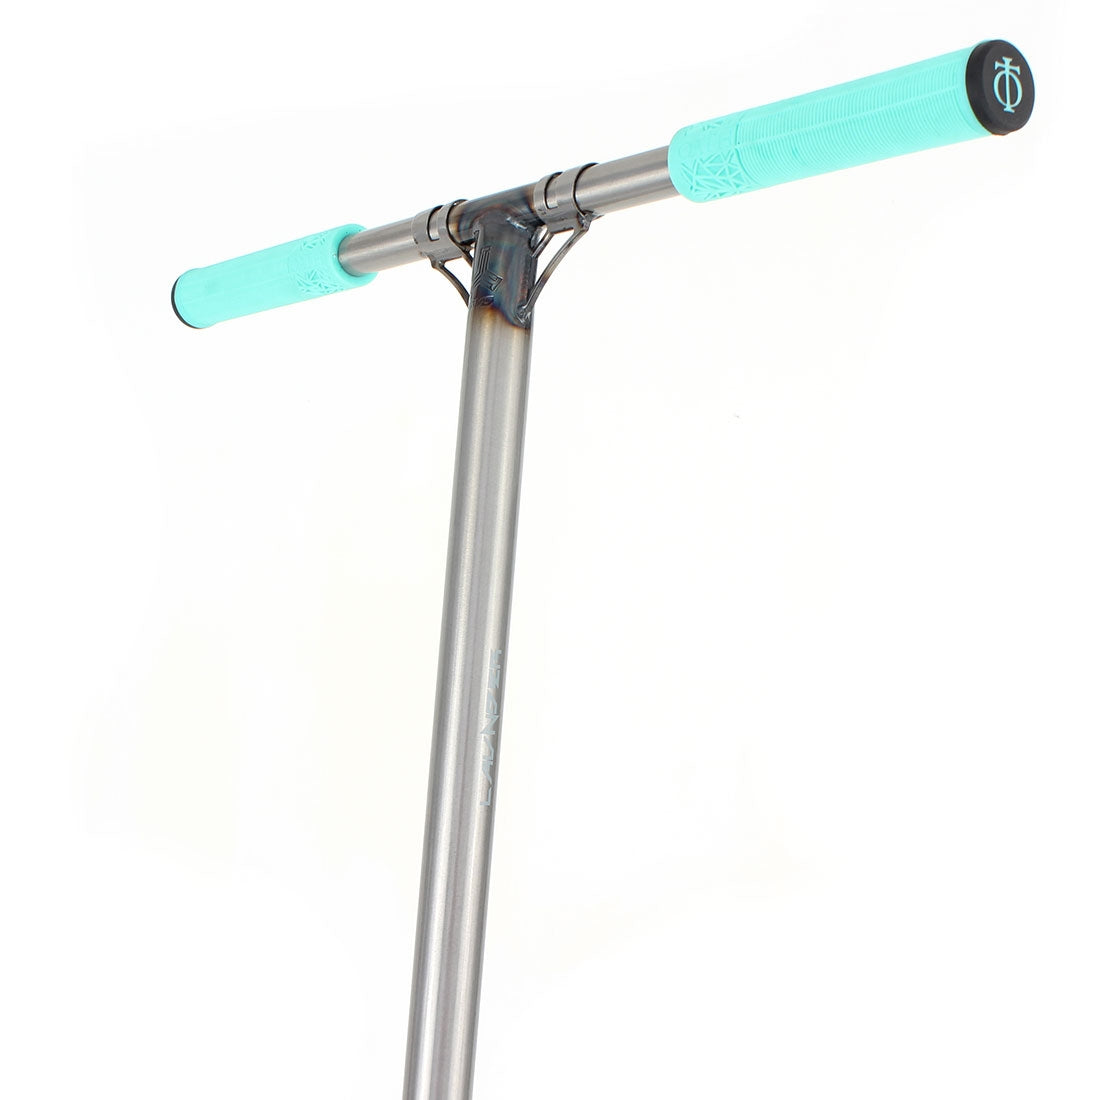 Triad Racketeer - Satin Black/Teal Scooter Completes Trick